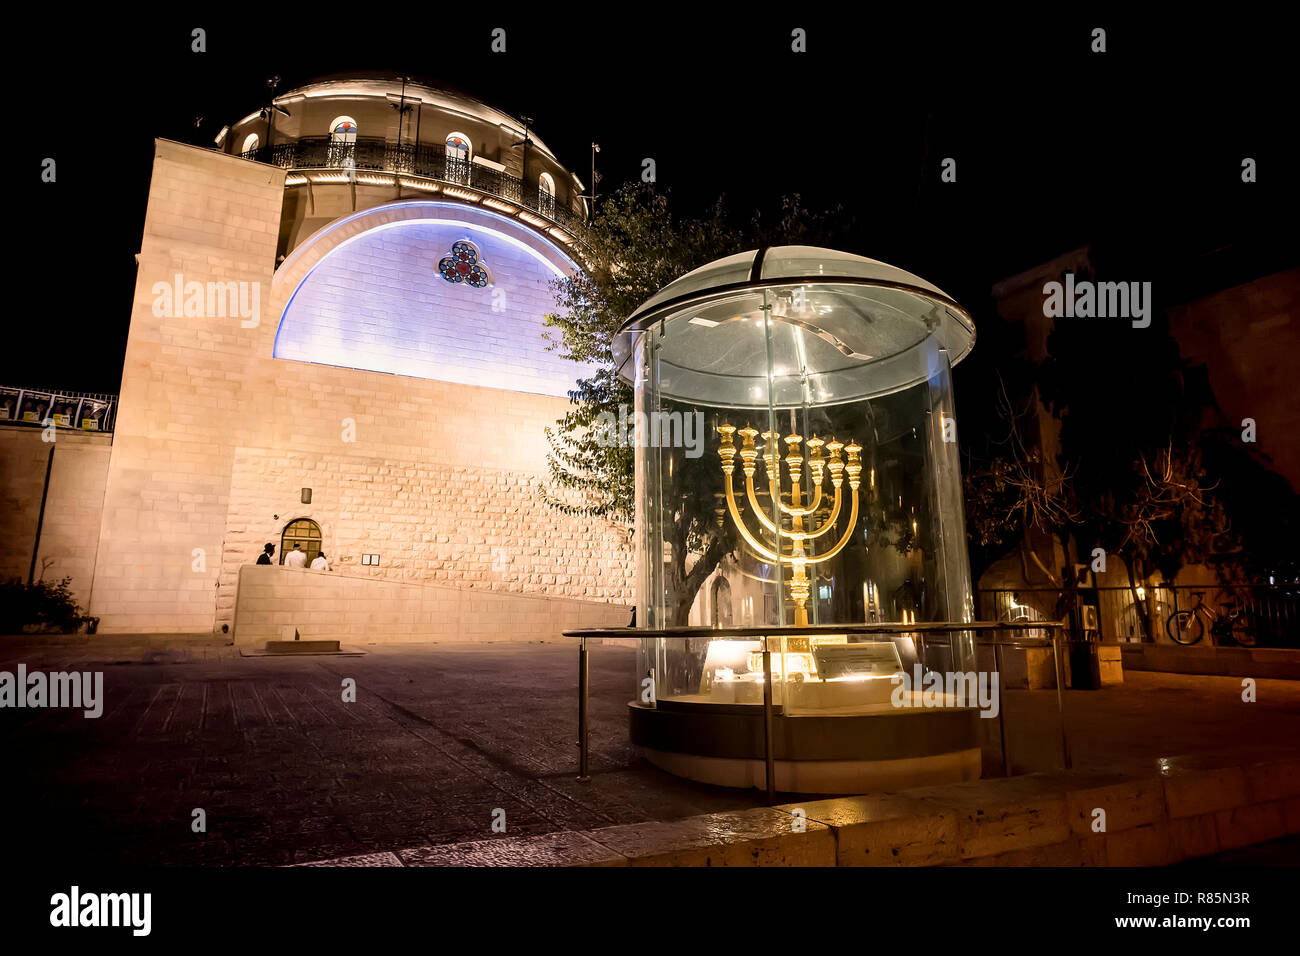 Menorah - the golden seven-barrel lamp - the national and religious Jewish emblem near the Dung Gates on the background of the synagogue Hurva at nigh Stock Photo